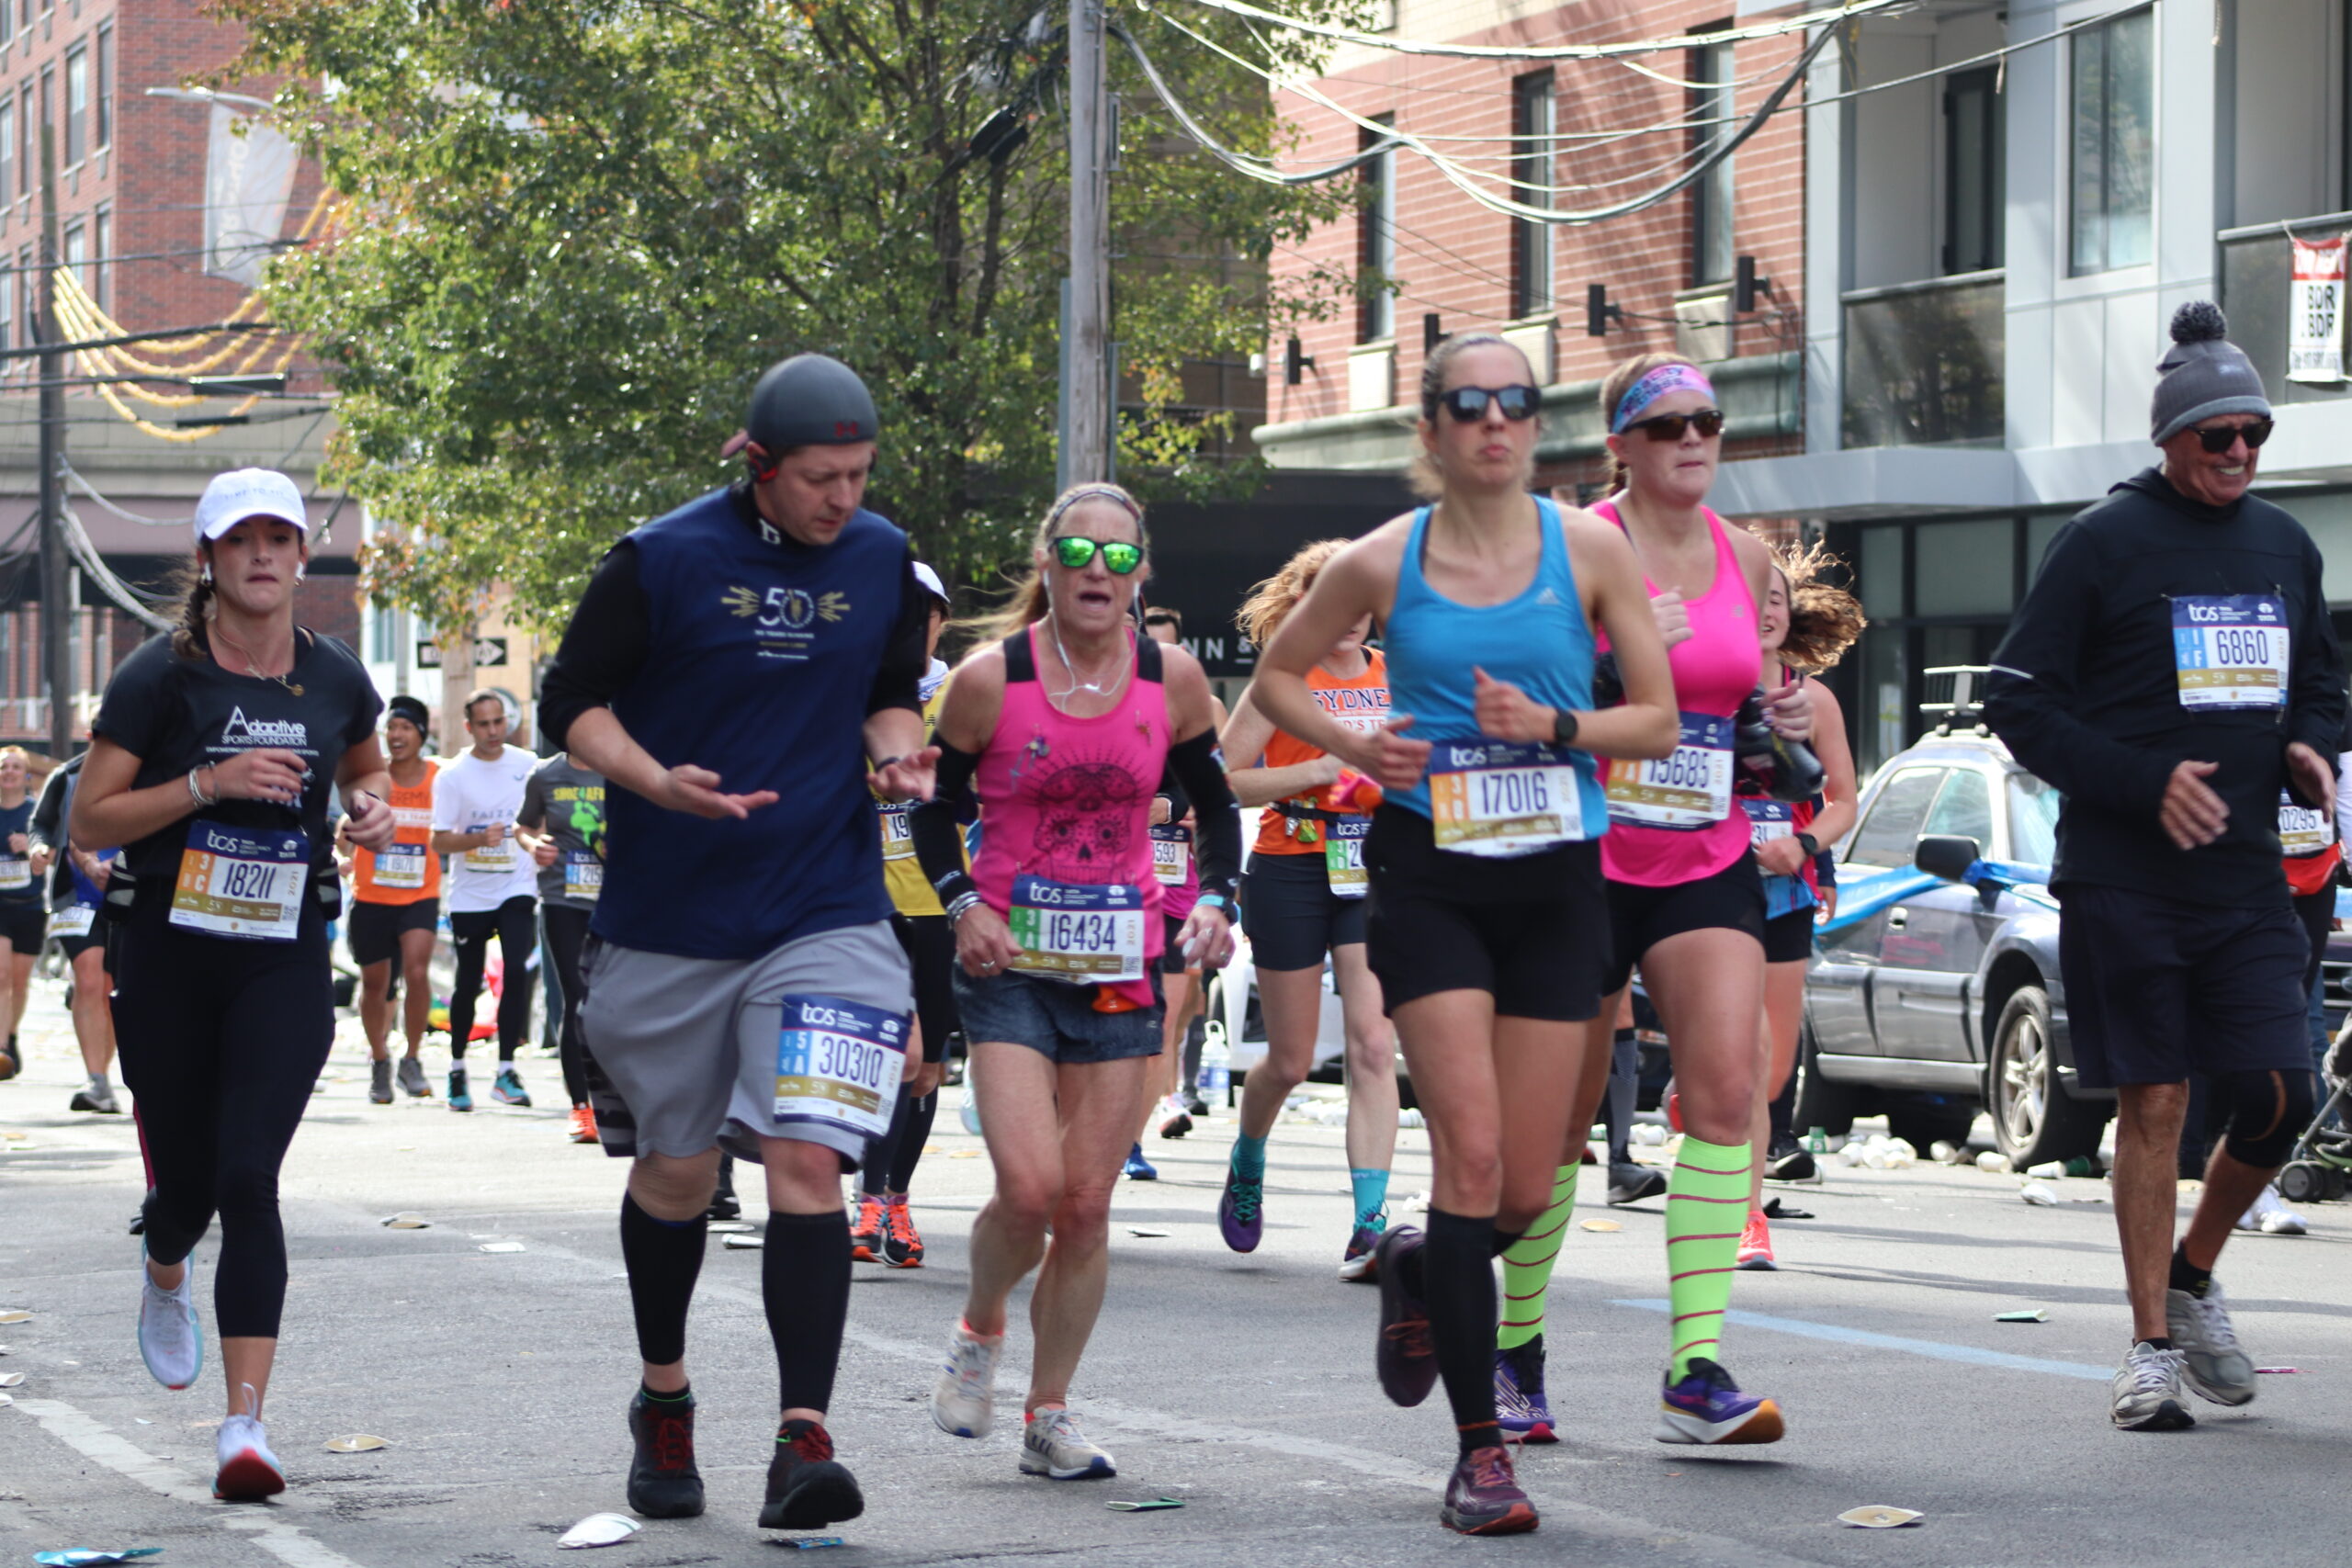 Runners at the Queens section of the New York City marathon route (Photo by Michael Dorgan, The Long Hall Podcast)